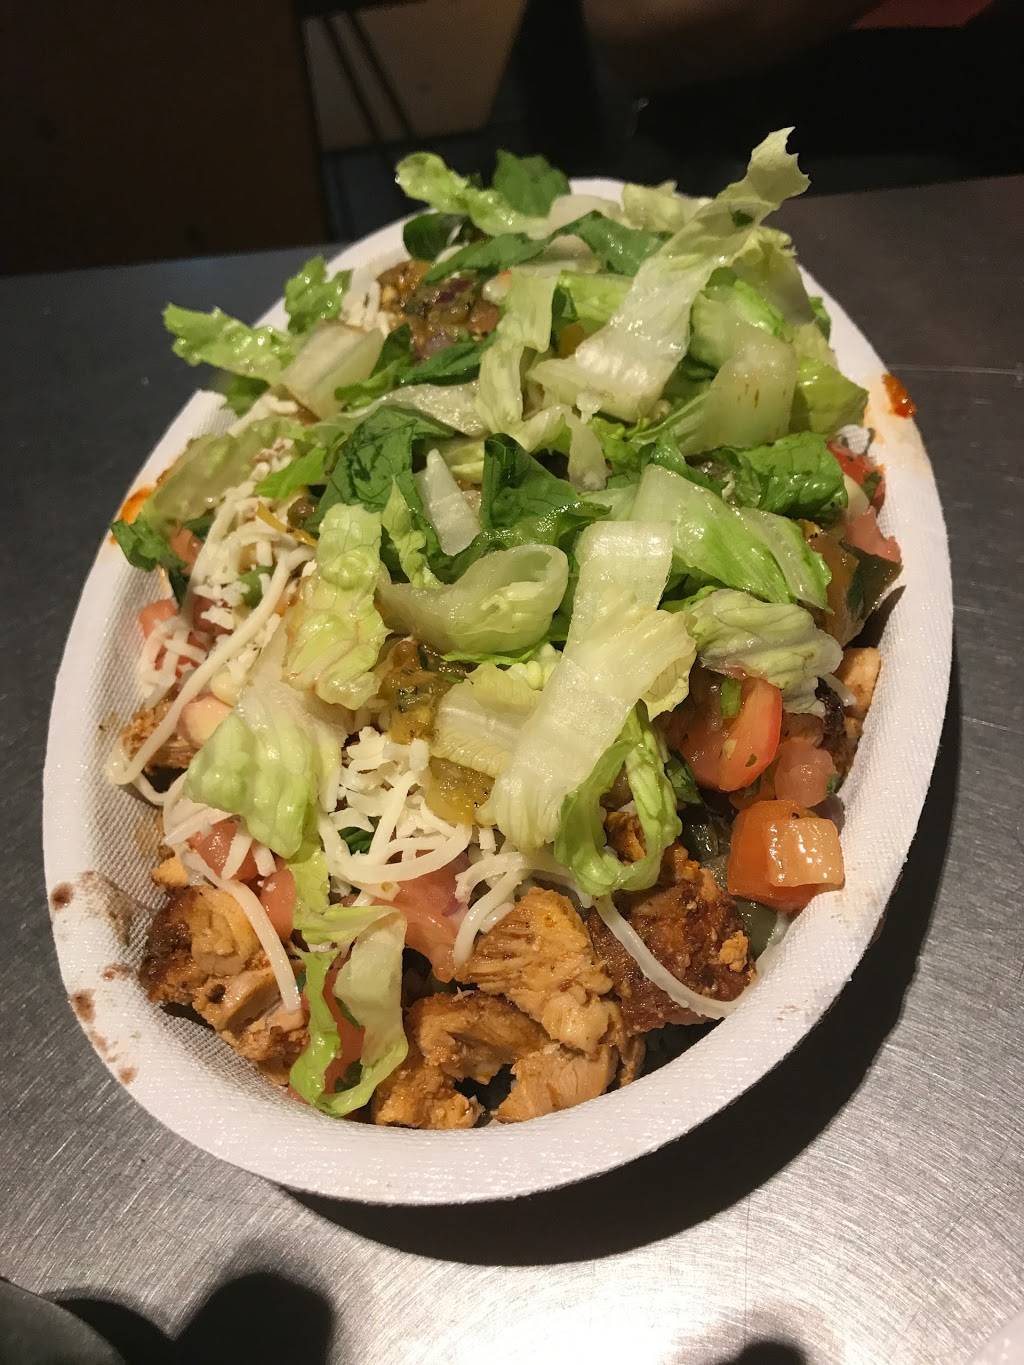 Chipotle Mexican Grill | restaurant | 12 Lawrence St, Dobbs Ferry, NY 10522, USA | 9146938135 OR +1 914-693-8135